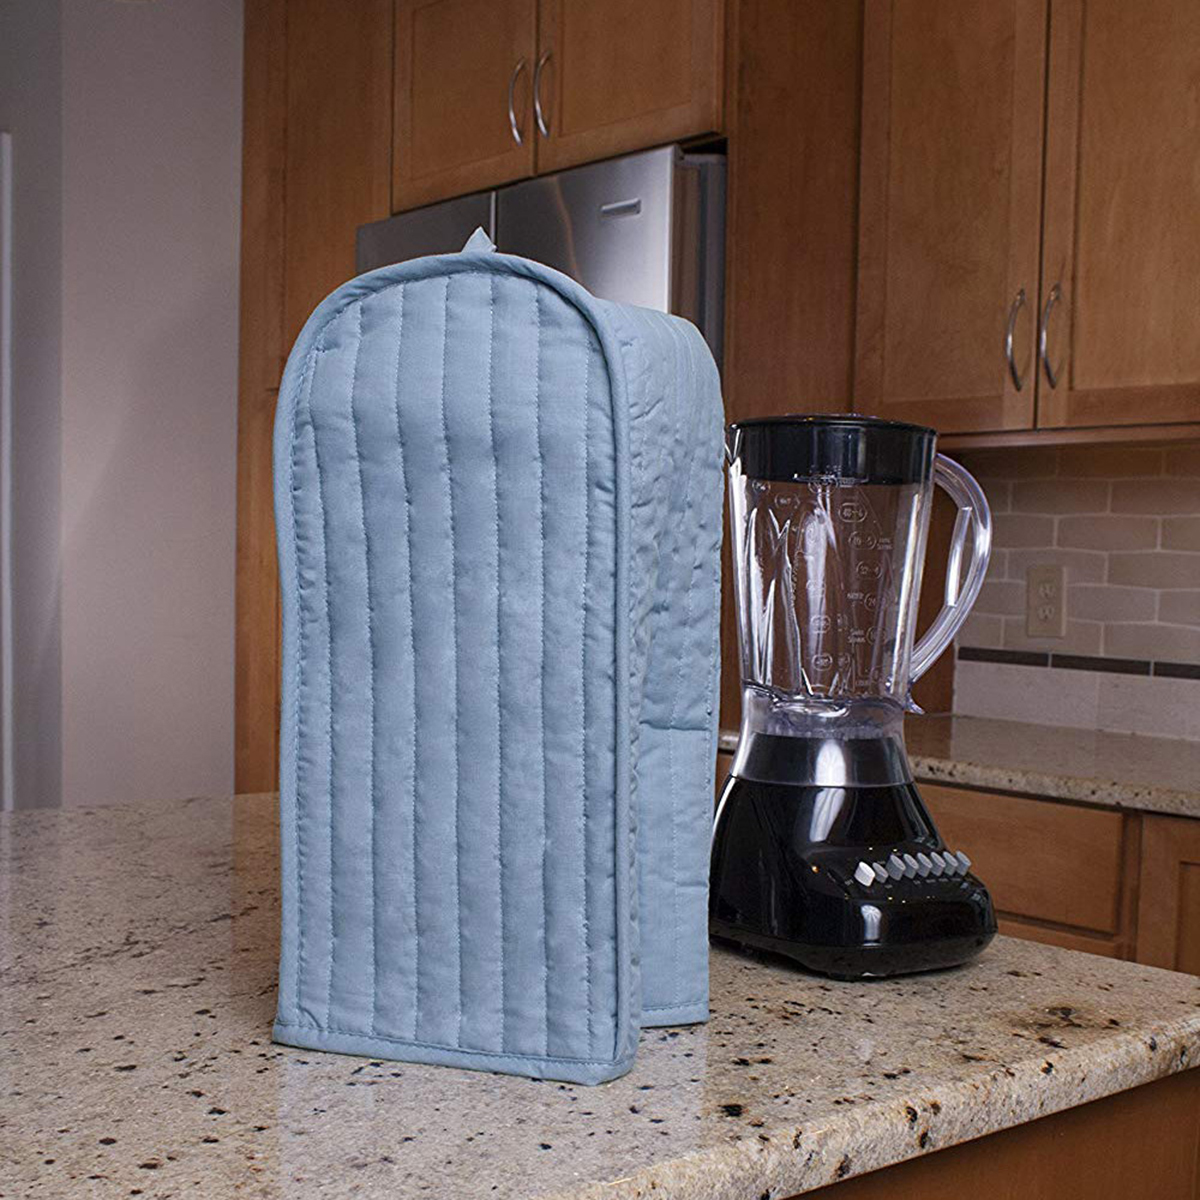 Quilted-Polyester-Kitchen-Blender-Appliance-Cover-Dust-proof-Protection-Case-Bag-1568082-3